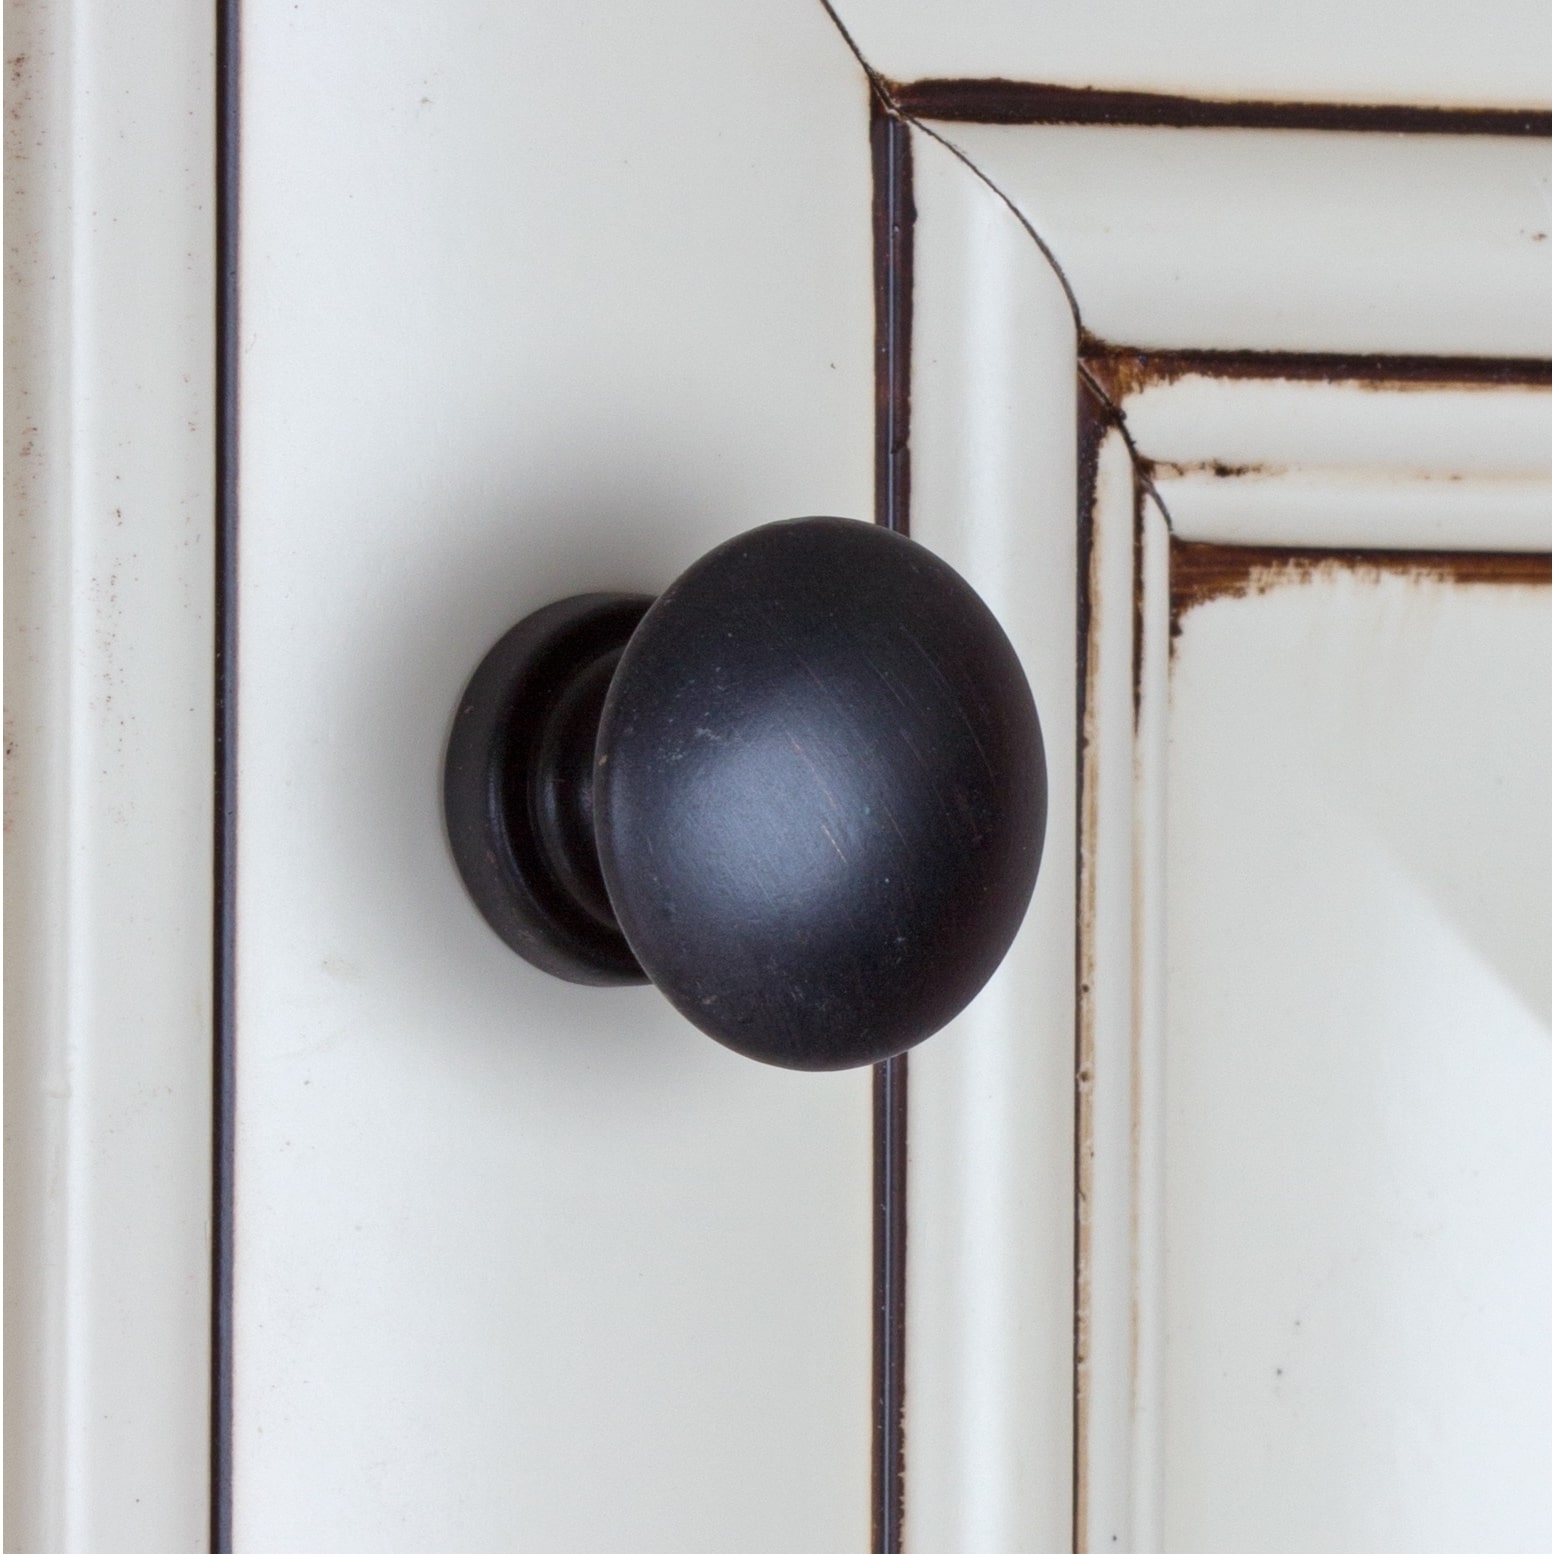 GlideRite 1 in. Classic Round Convex Cabinet Hardware Knobs, Oil Rubbed Bronze, Pack of 25 - image 4 of 5